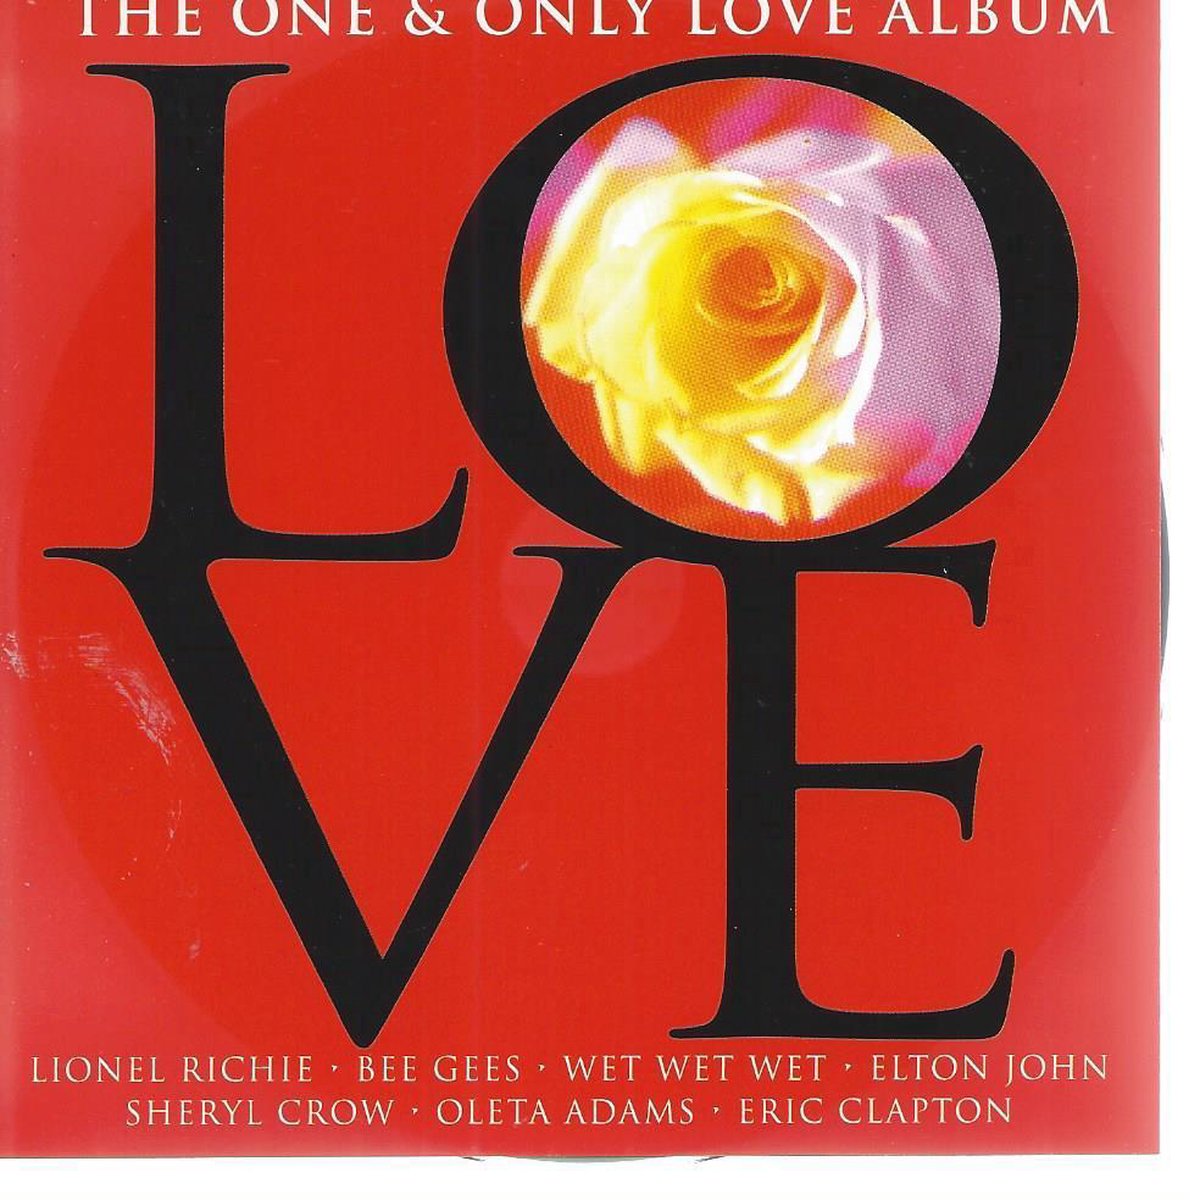 One And Only Love Album - various artists